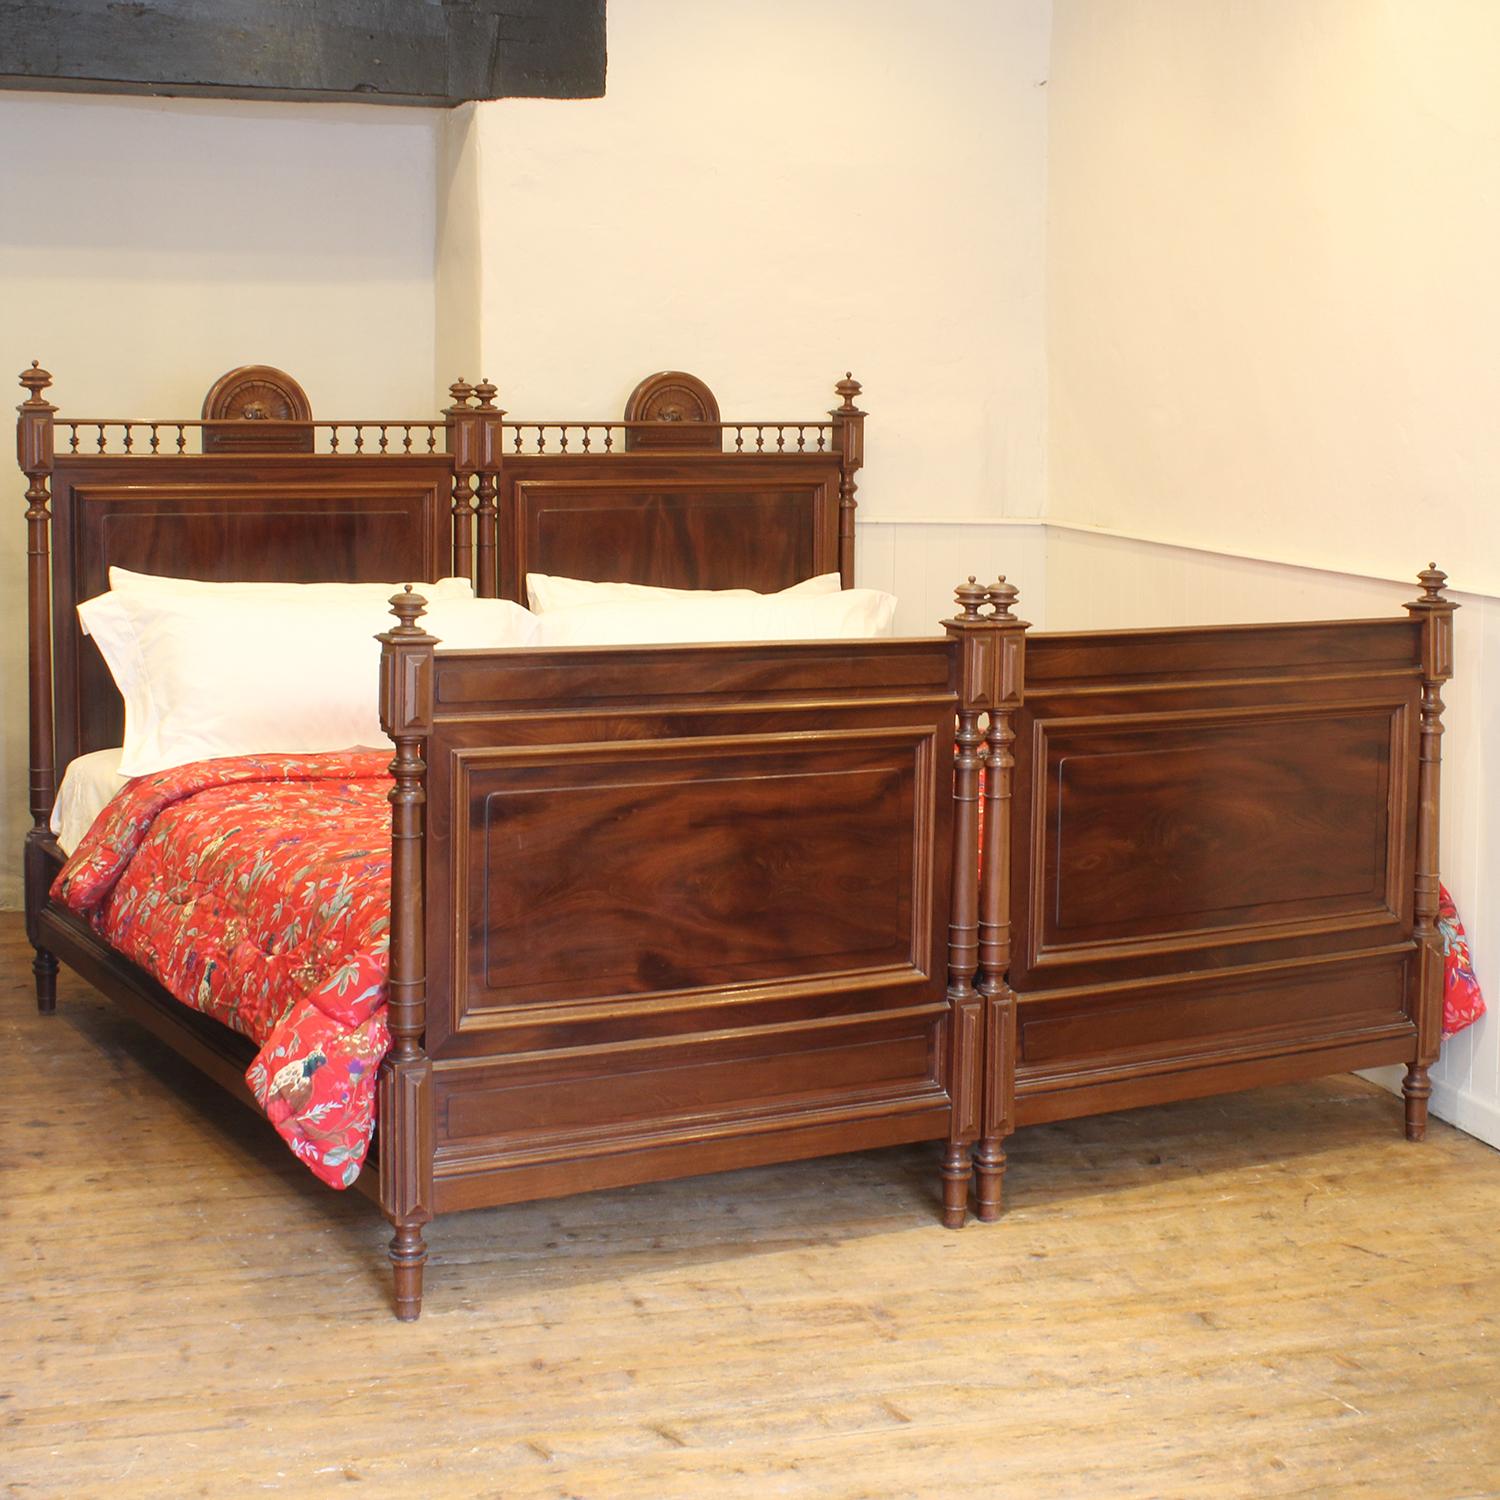 A pair of French Louis XVI style beds from the early Twentieth Century, which interlock to form a wide bedstead. The beds normally stand together to form an 84 inch wide bed, but can be separated to create a pair of 42 inch wide beds.

The price